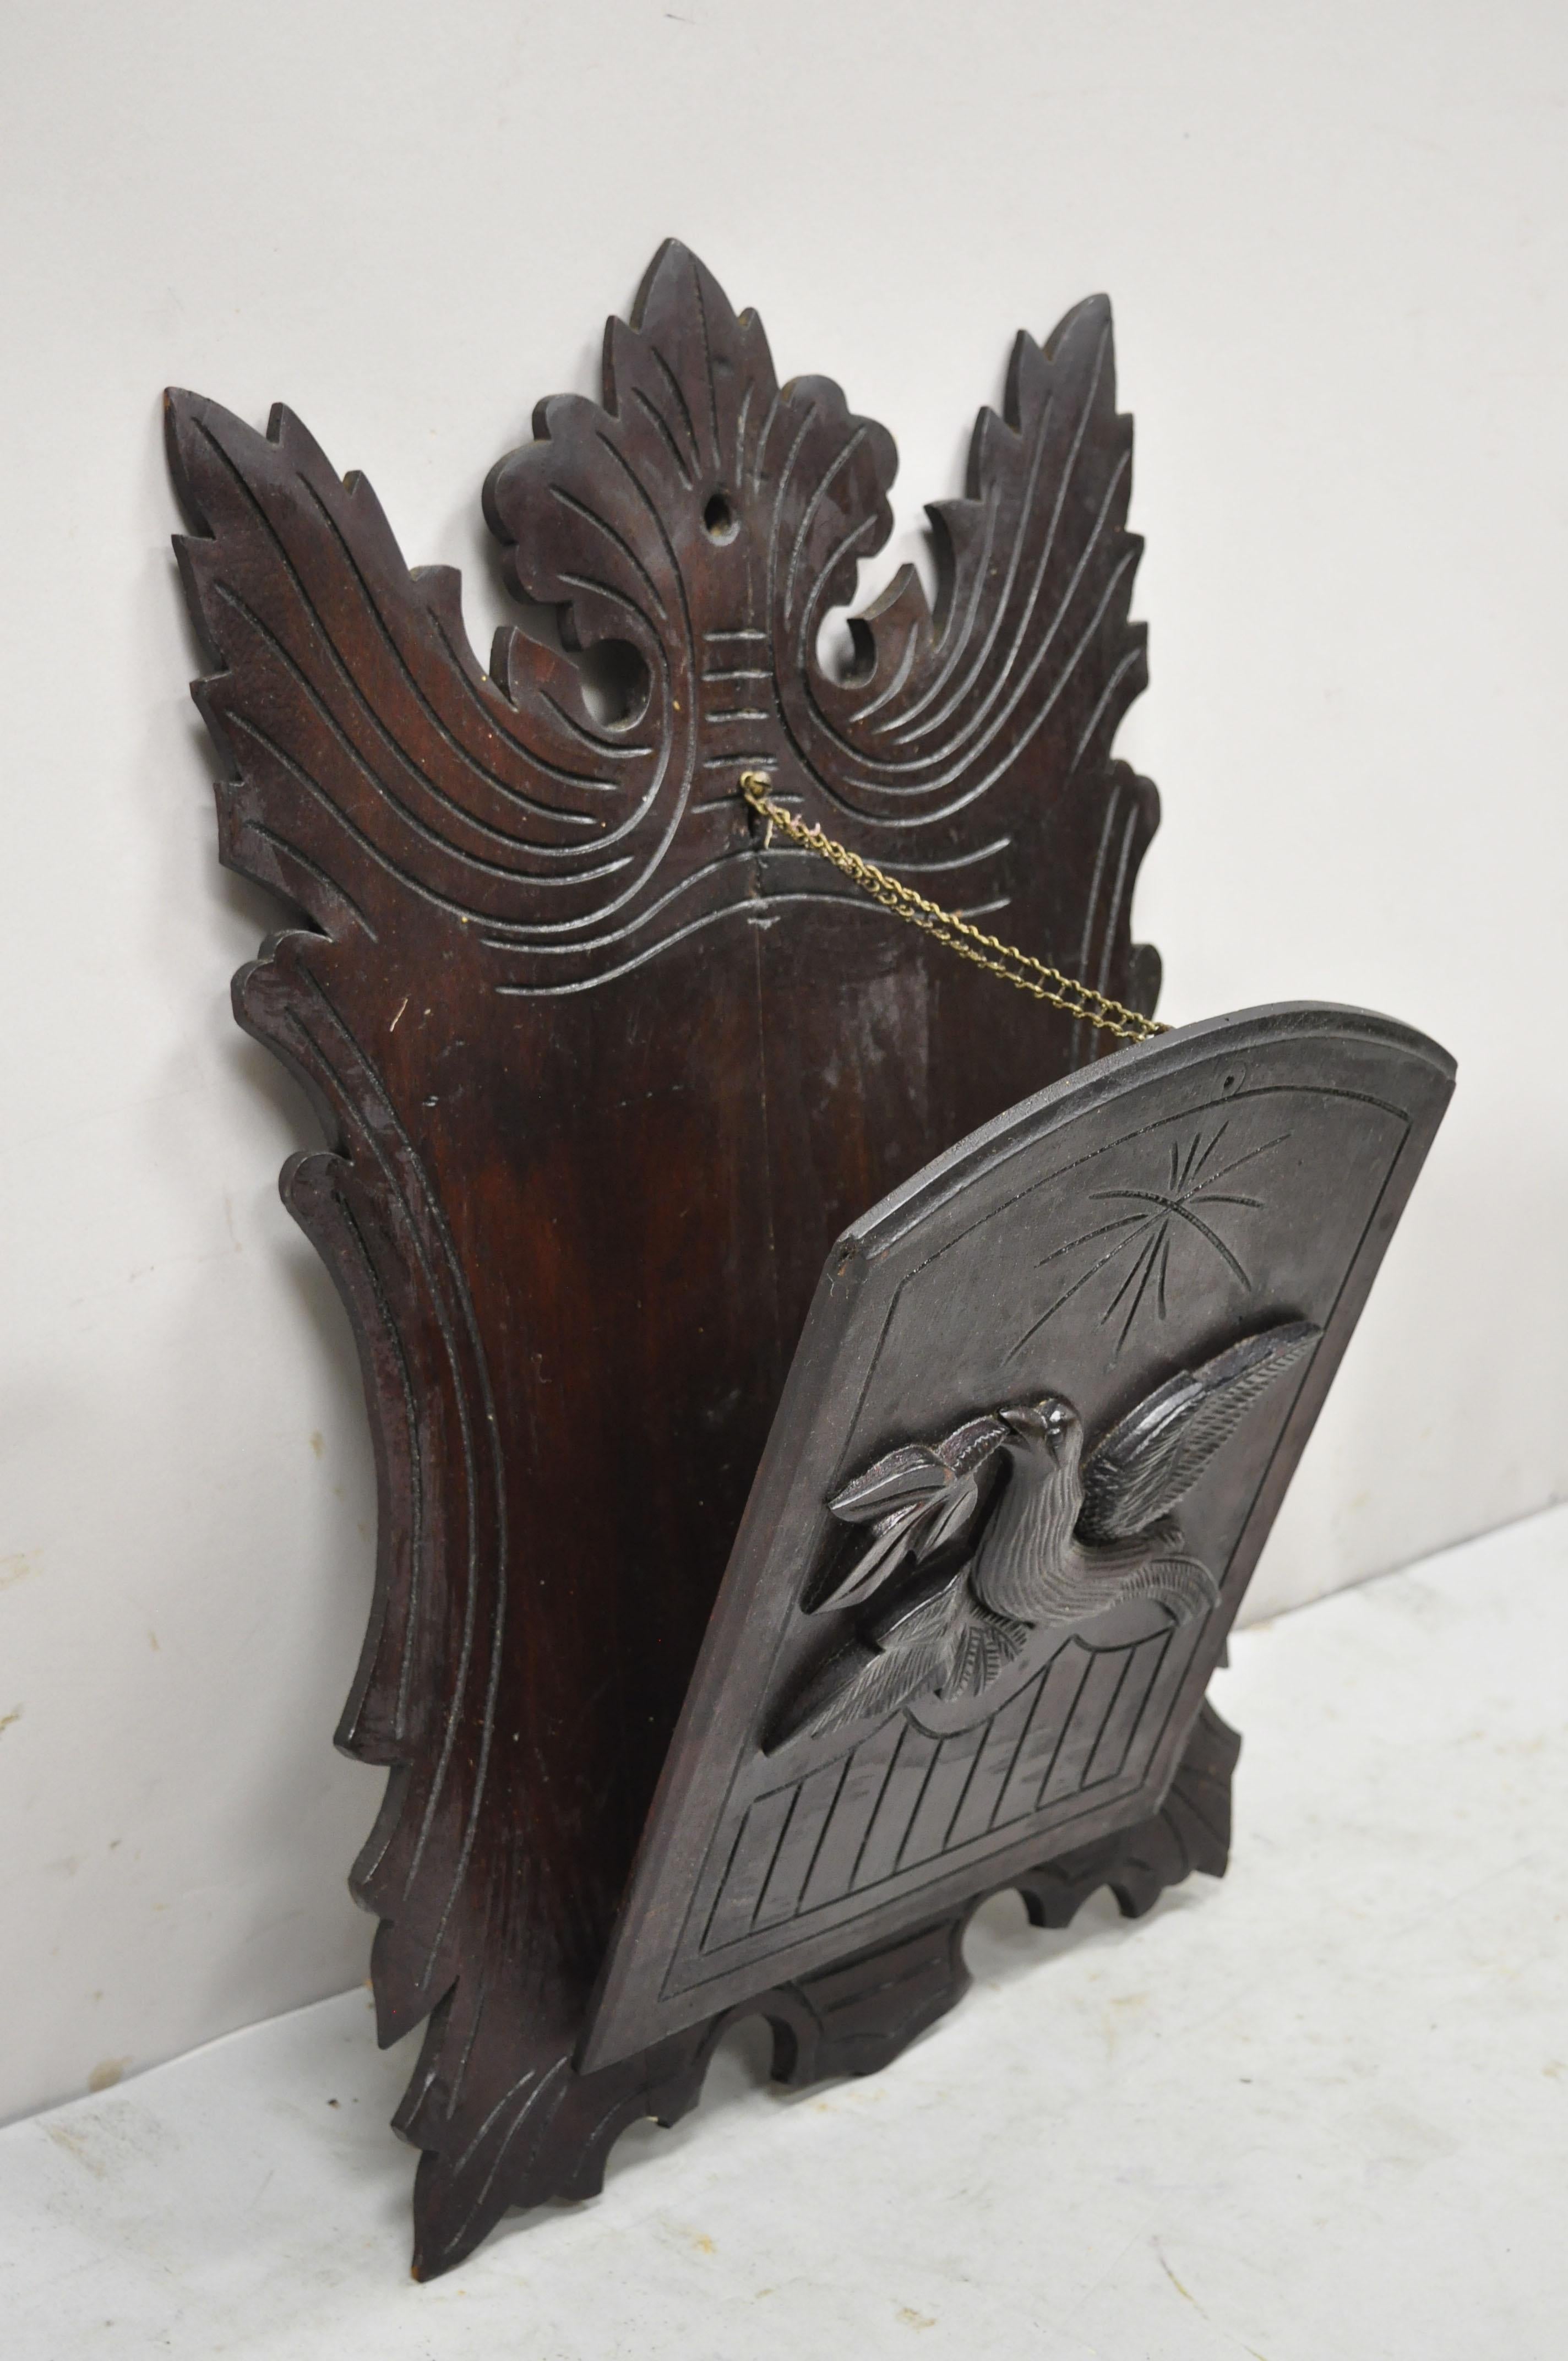 Antique German black forest carved walnut bird wall pocket letter holder. Item features solid wood construction, beautiful wood grain, nicely carved details, very nice antique item, quality American craftsmanship, great style and form. Circa Early